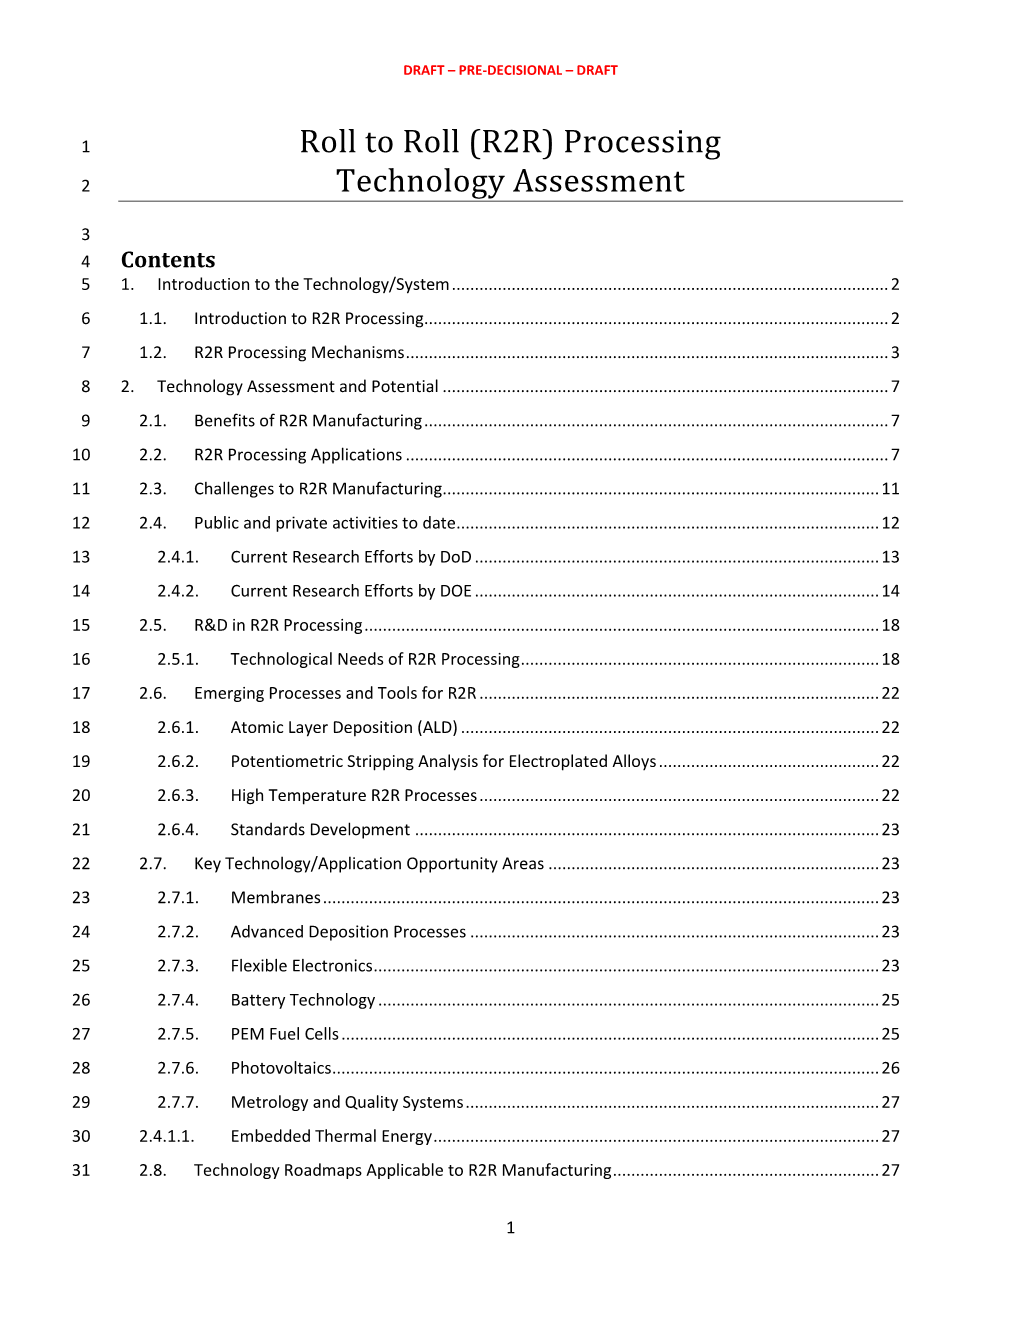 Roll to Roll (R2R) Processing Technology Assessment